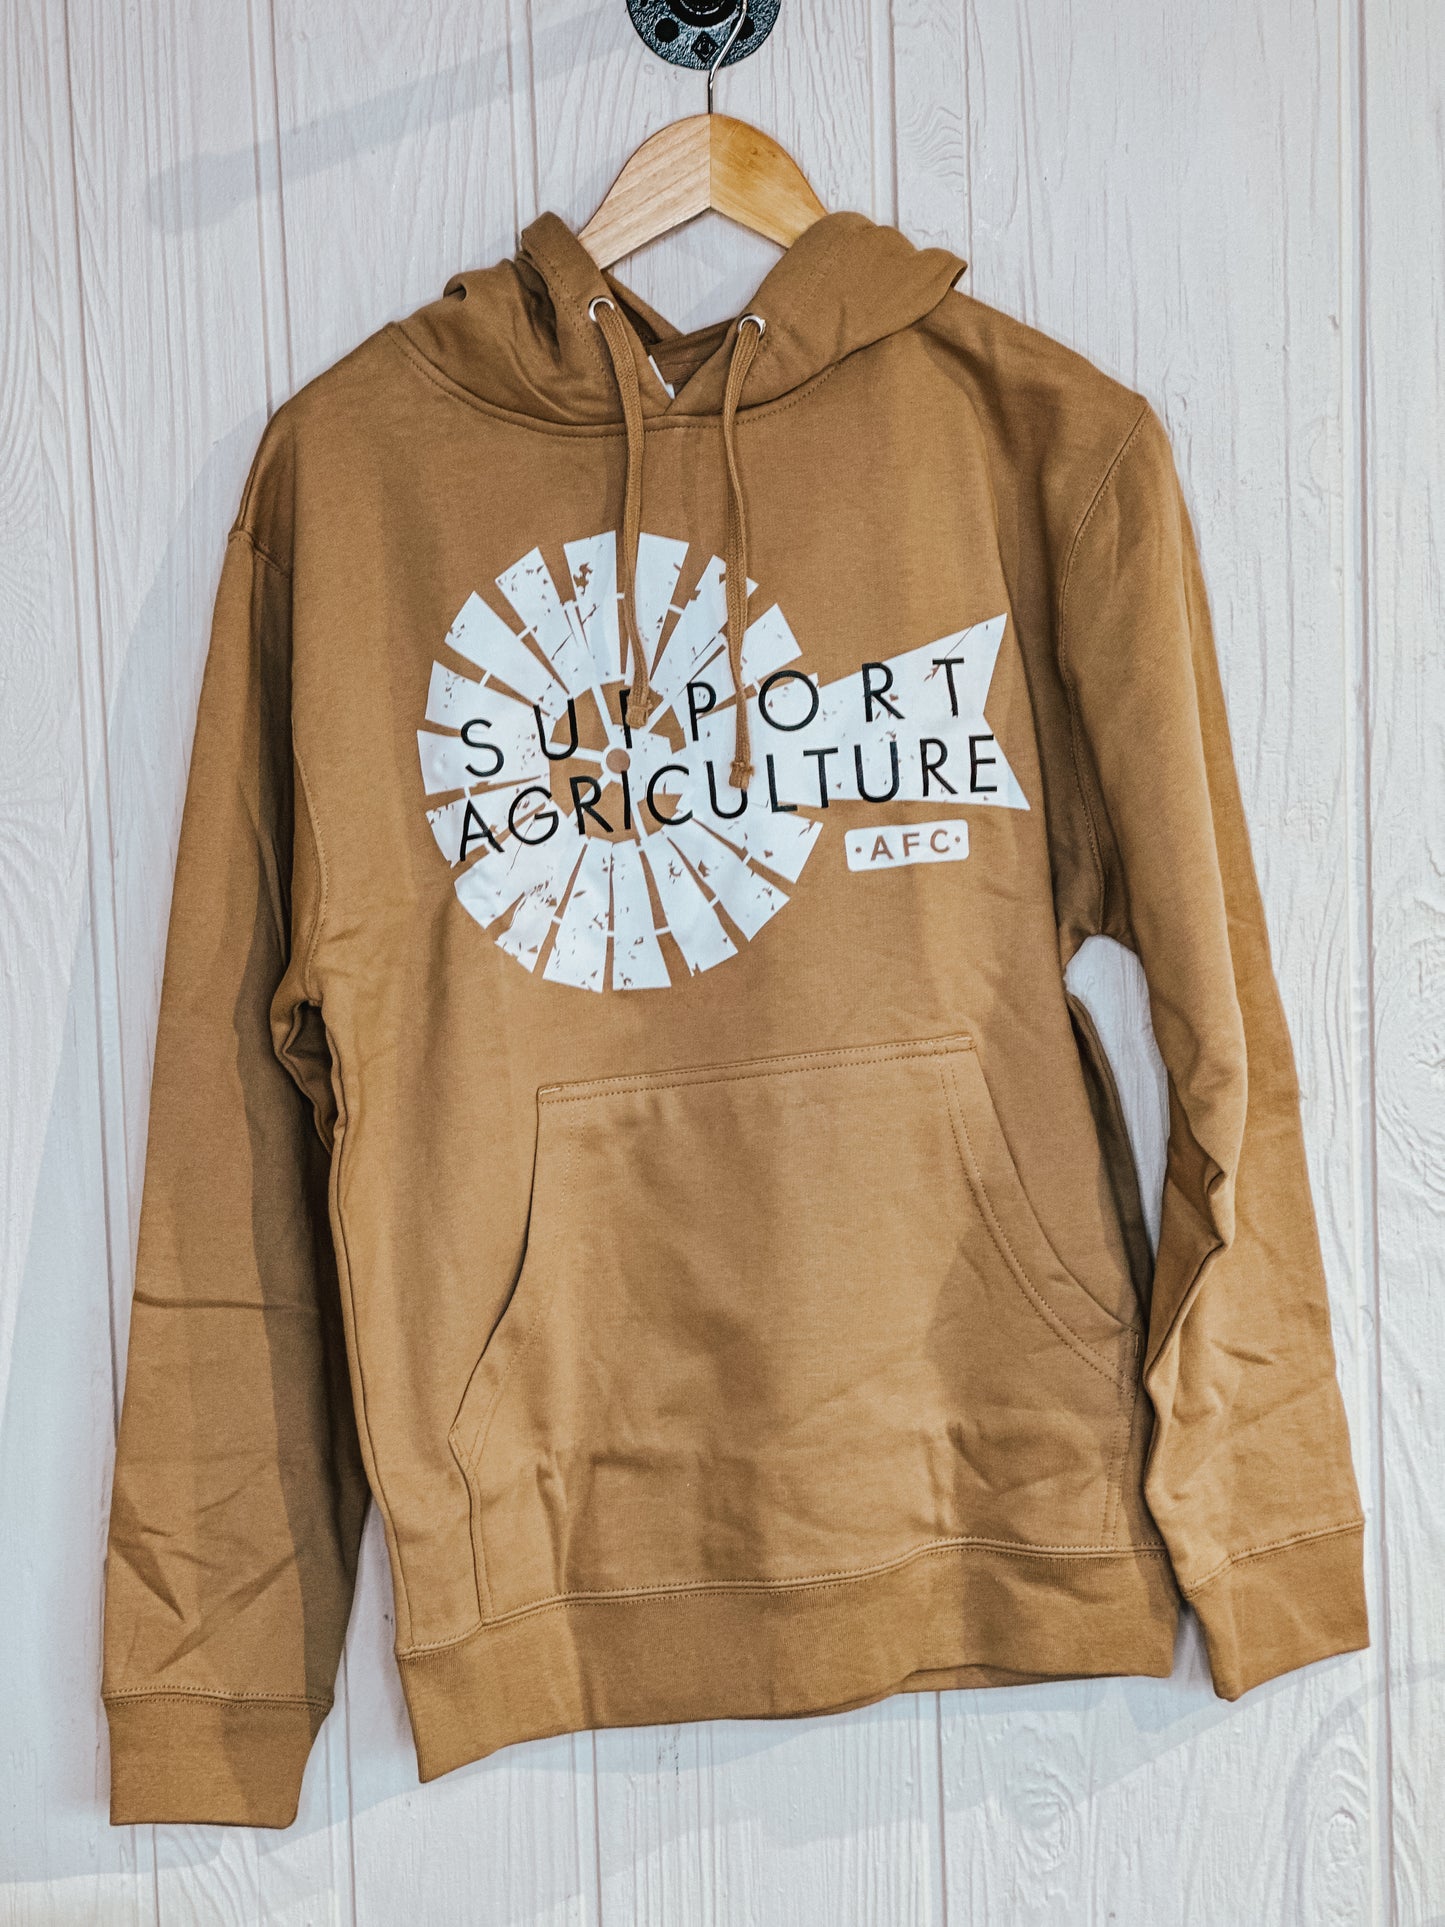 Western Support Agriculture Hoodie - Tan